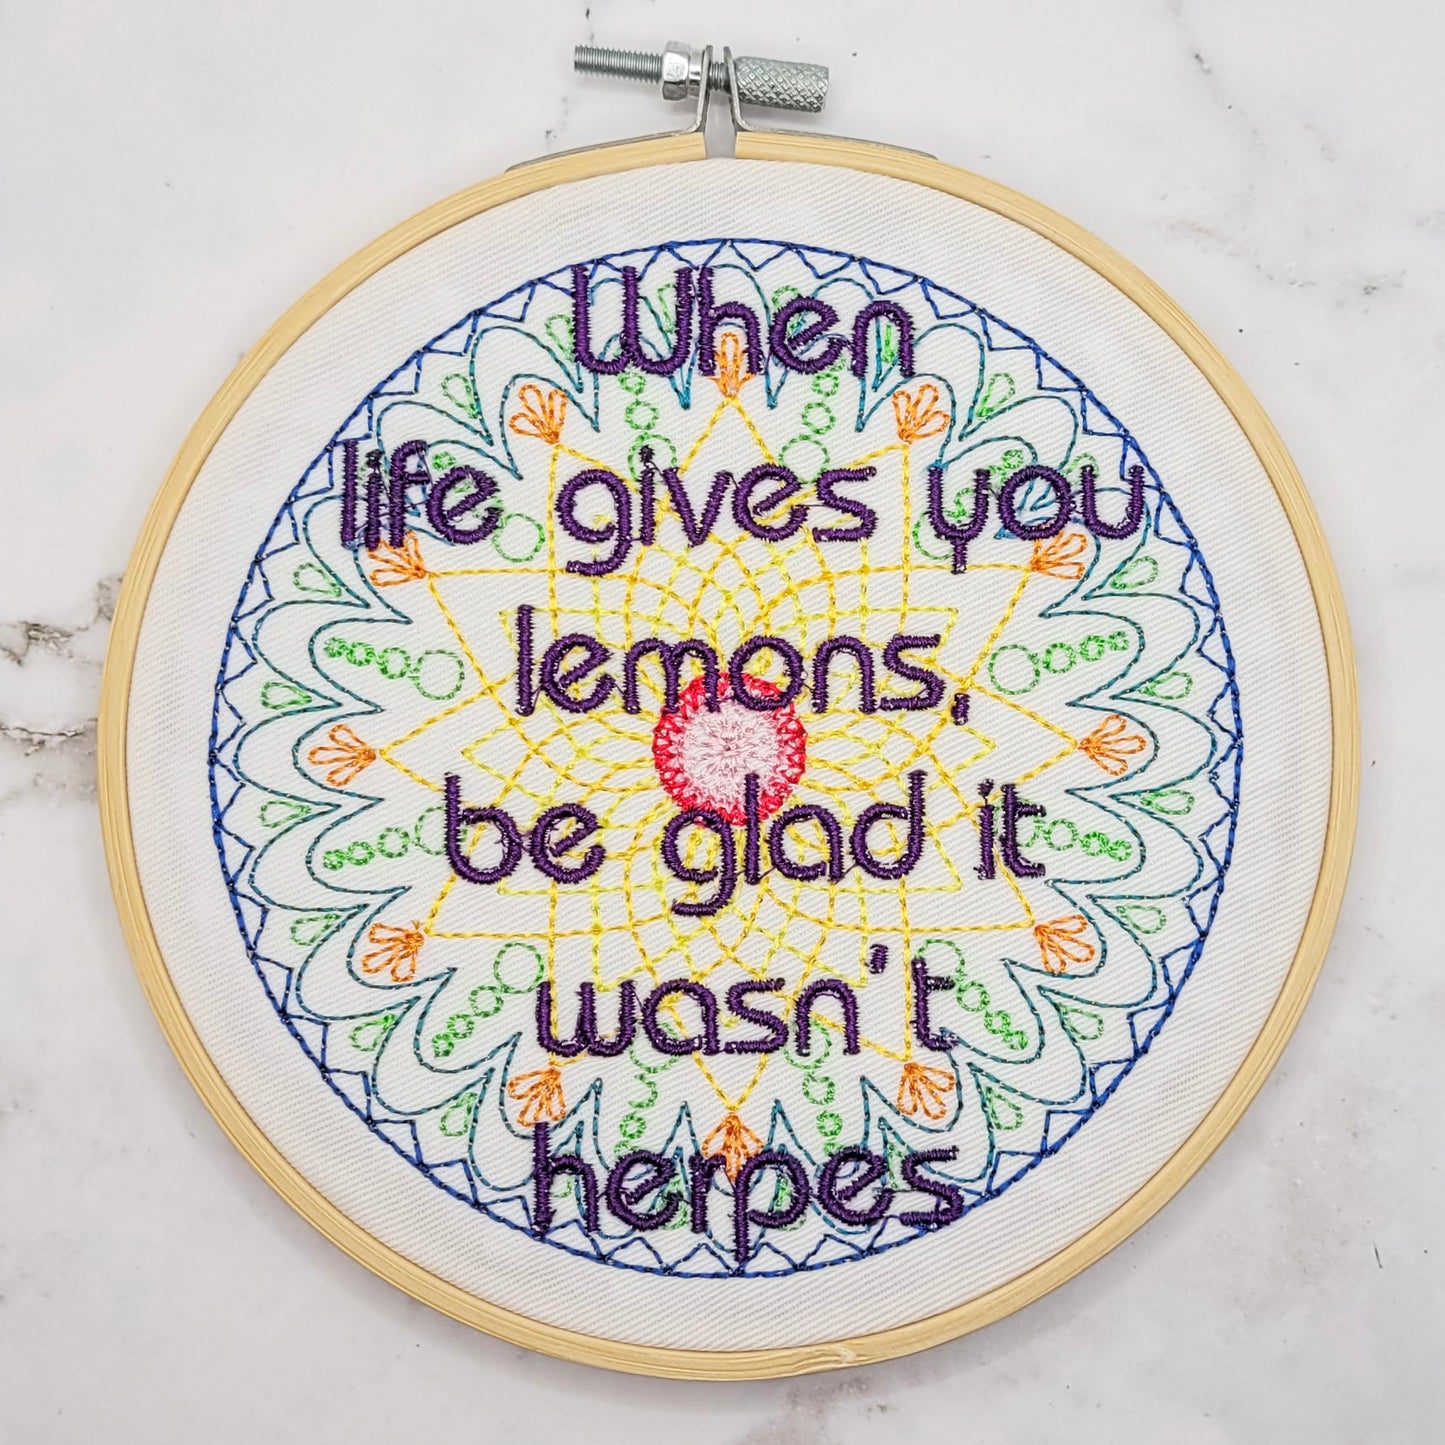 6" Life, Lemons, Herpes Embroidered Wall Hanging